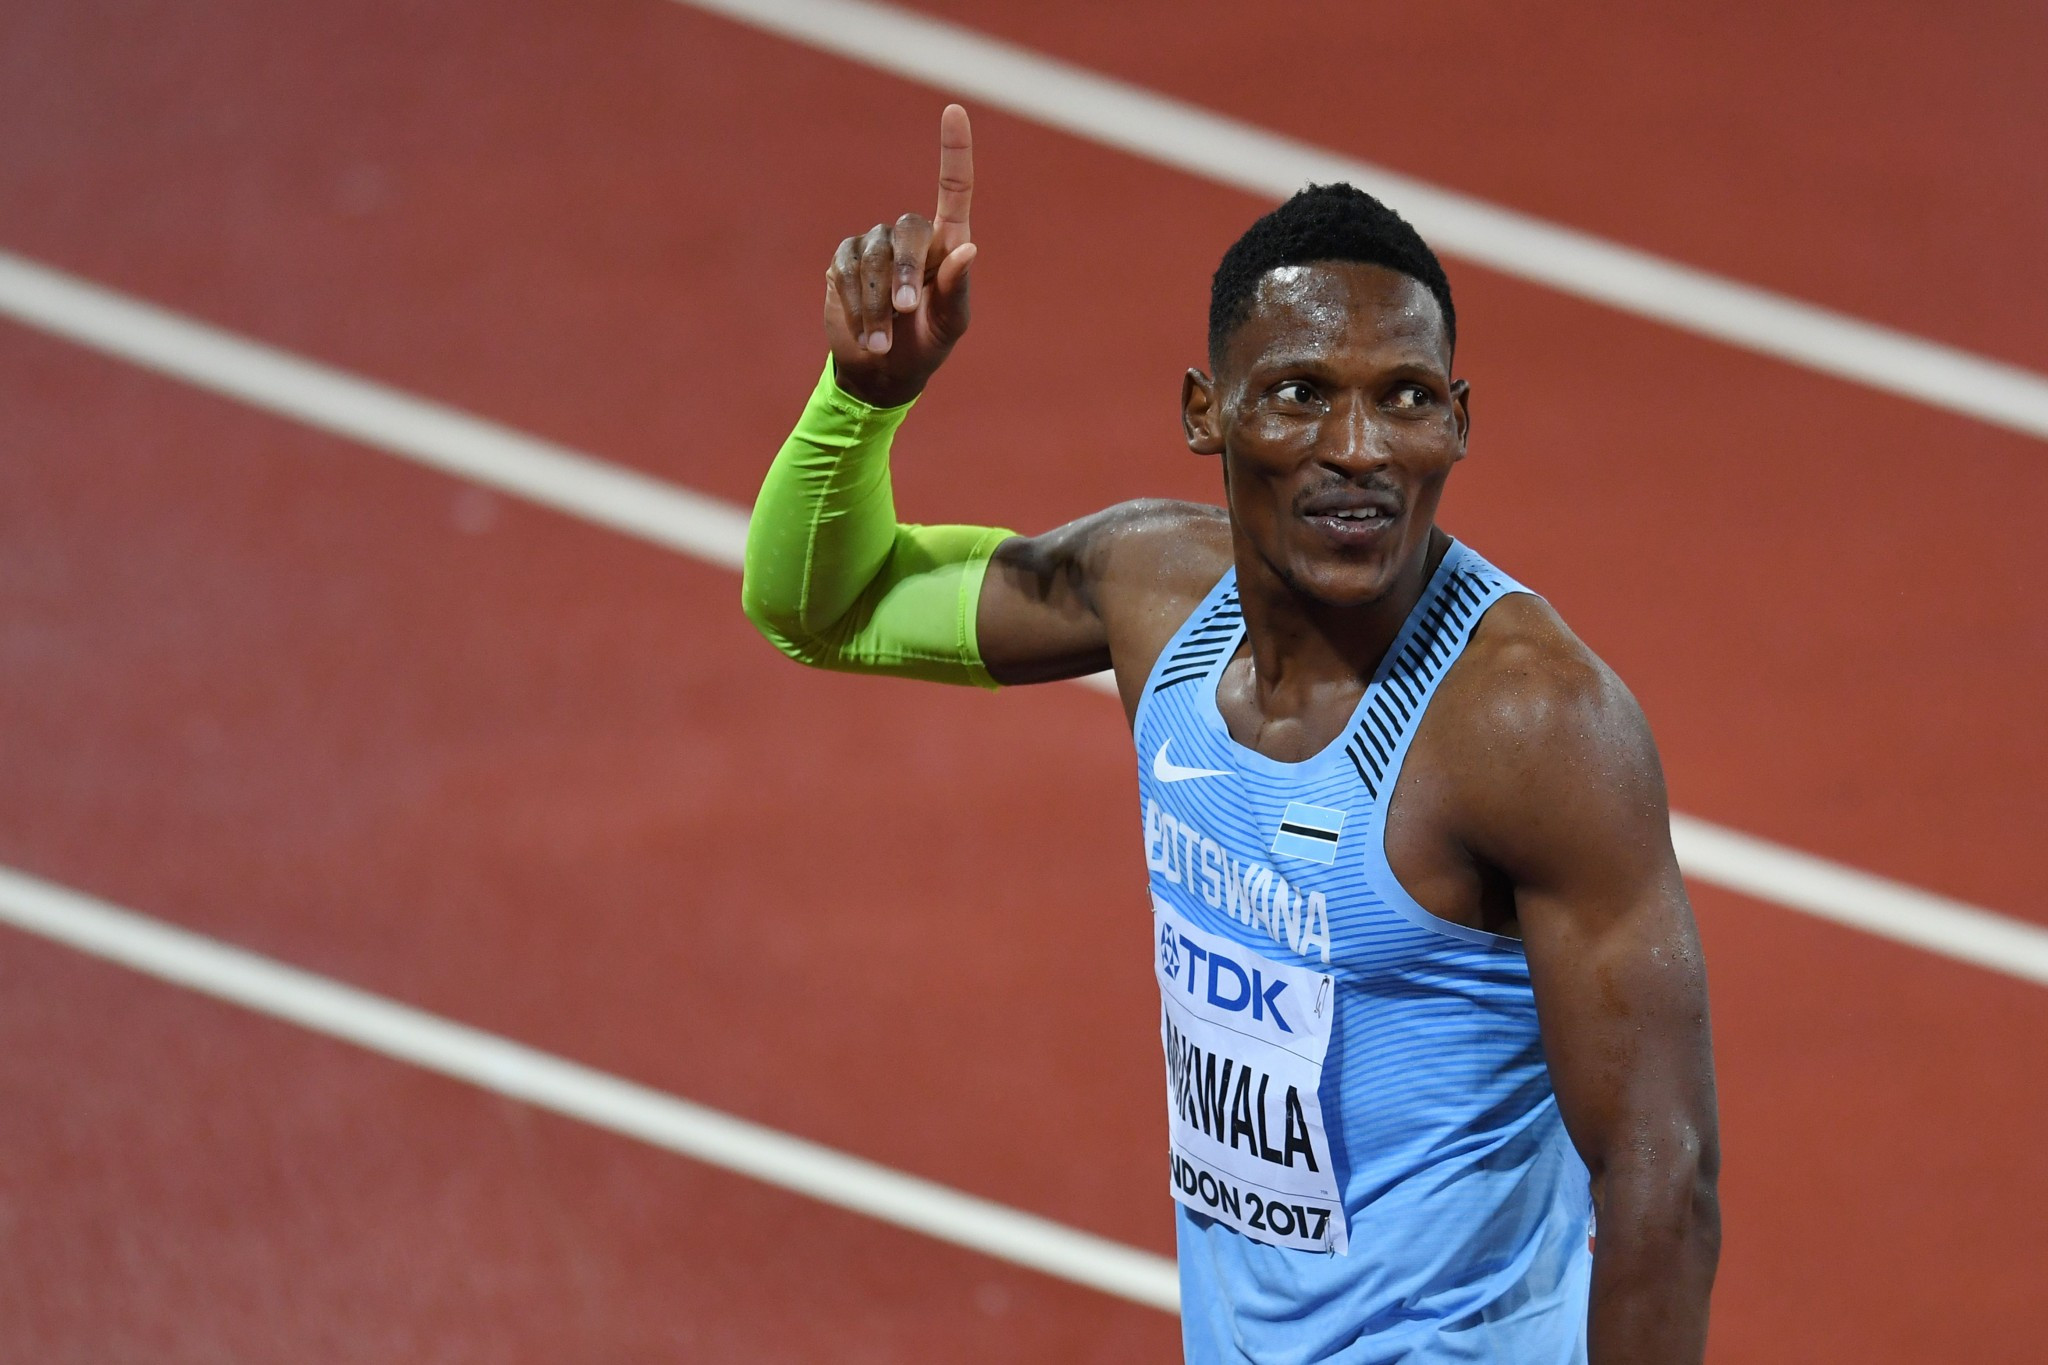 Botswana's Isaac Makwala was allowed to compete in the 200m after being quarantined ©Getty Images